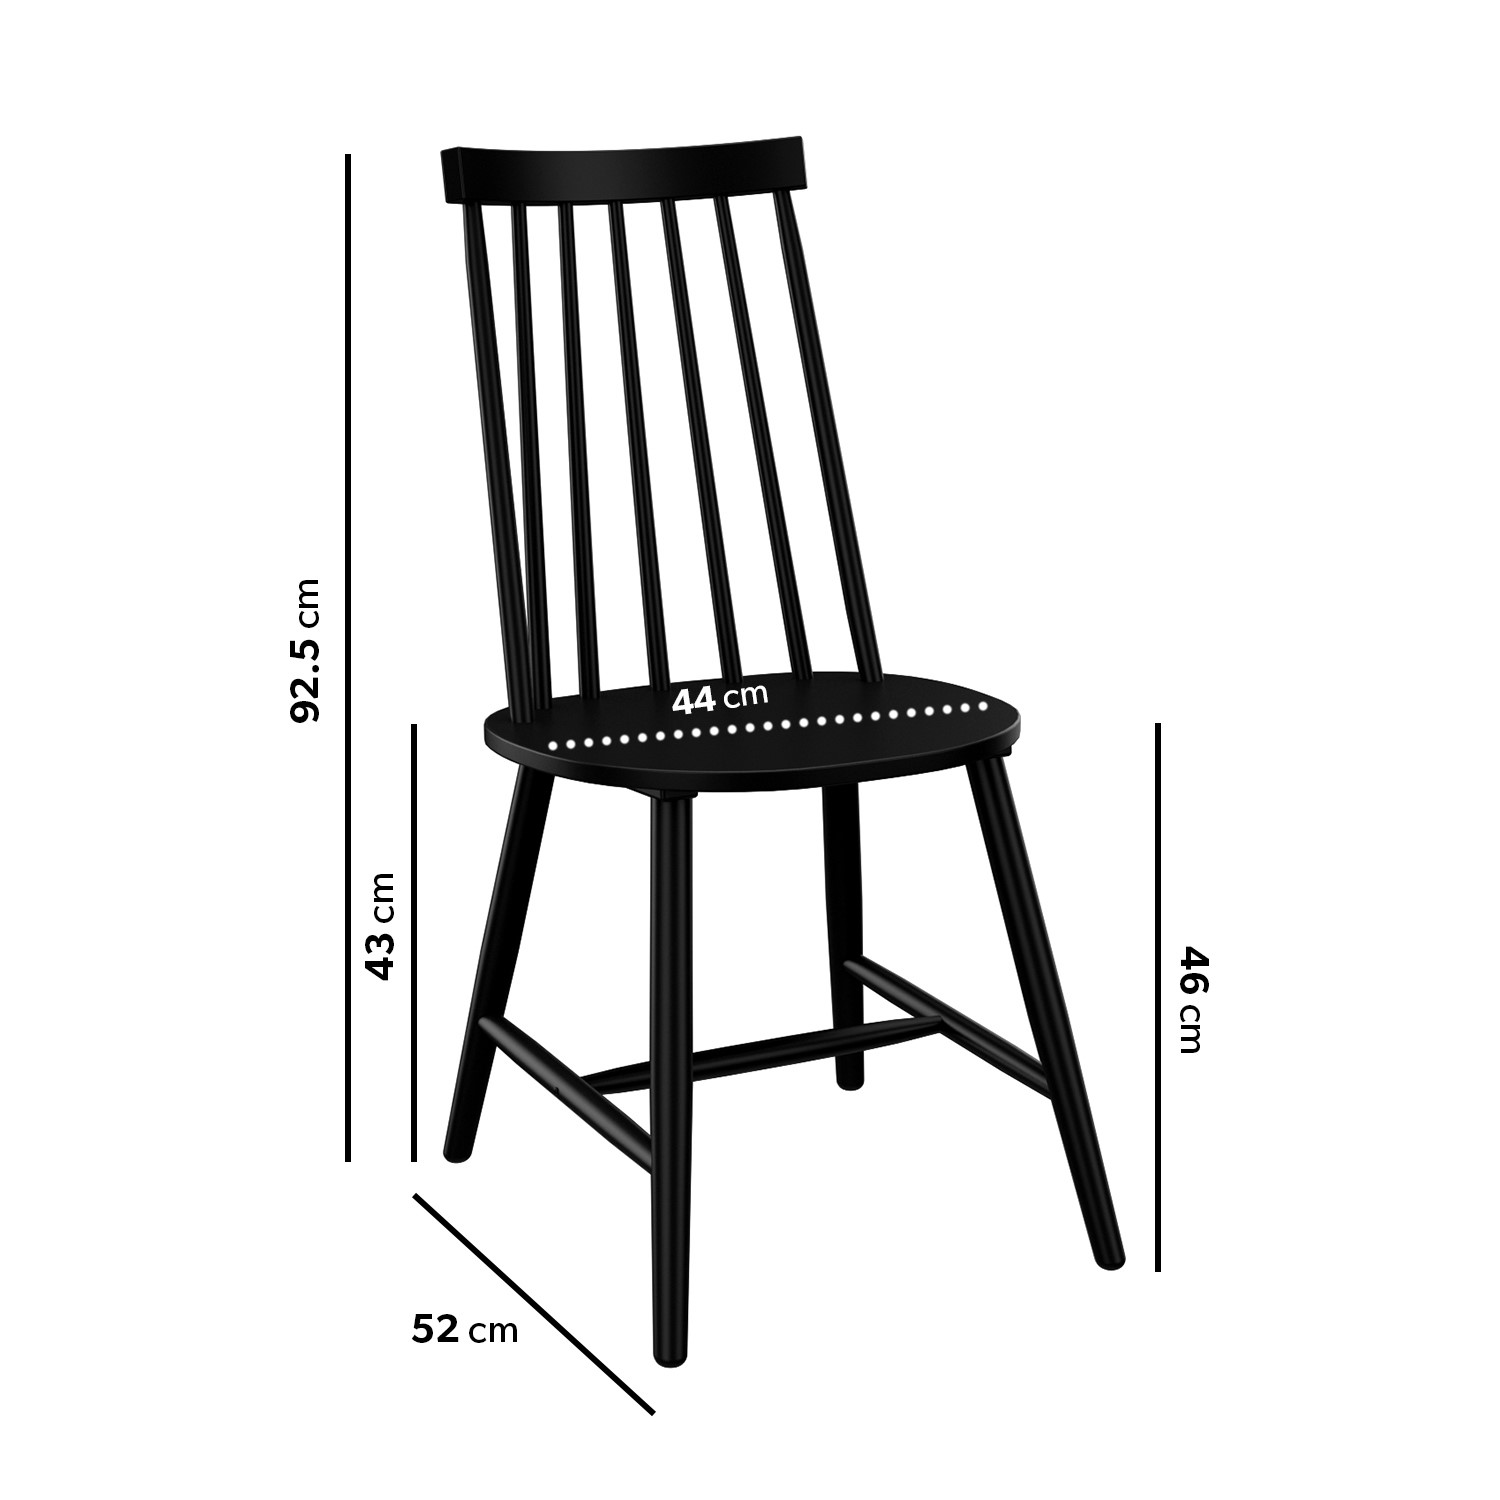 Read more about Set of 2 black wooden spindle dining chairs cami